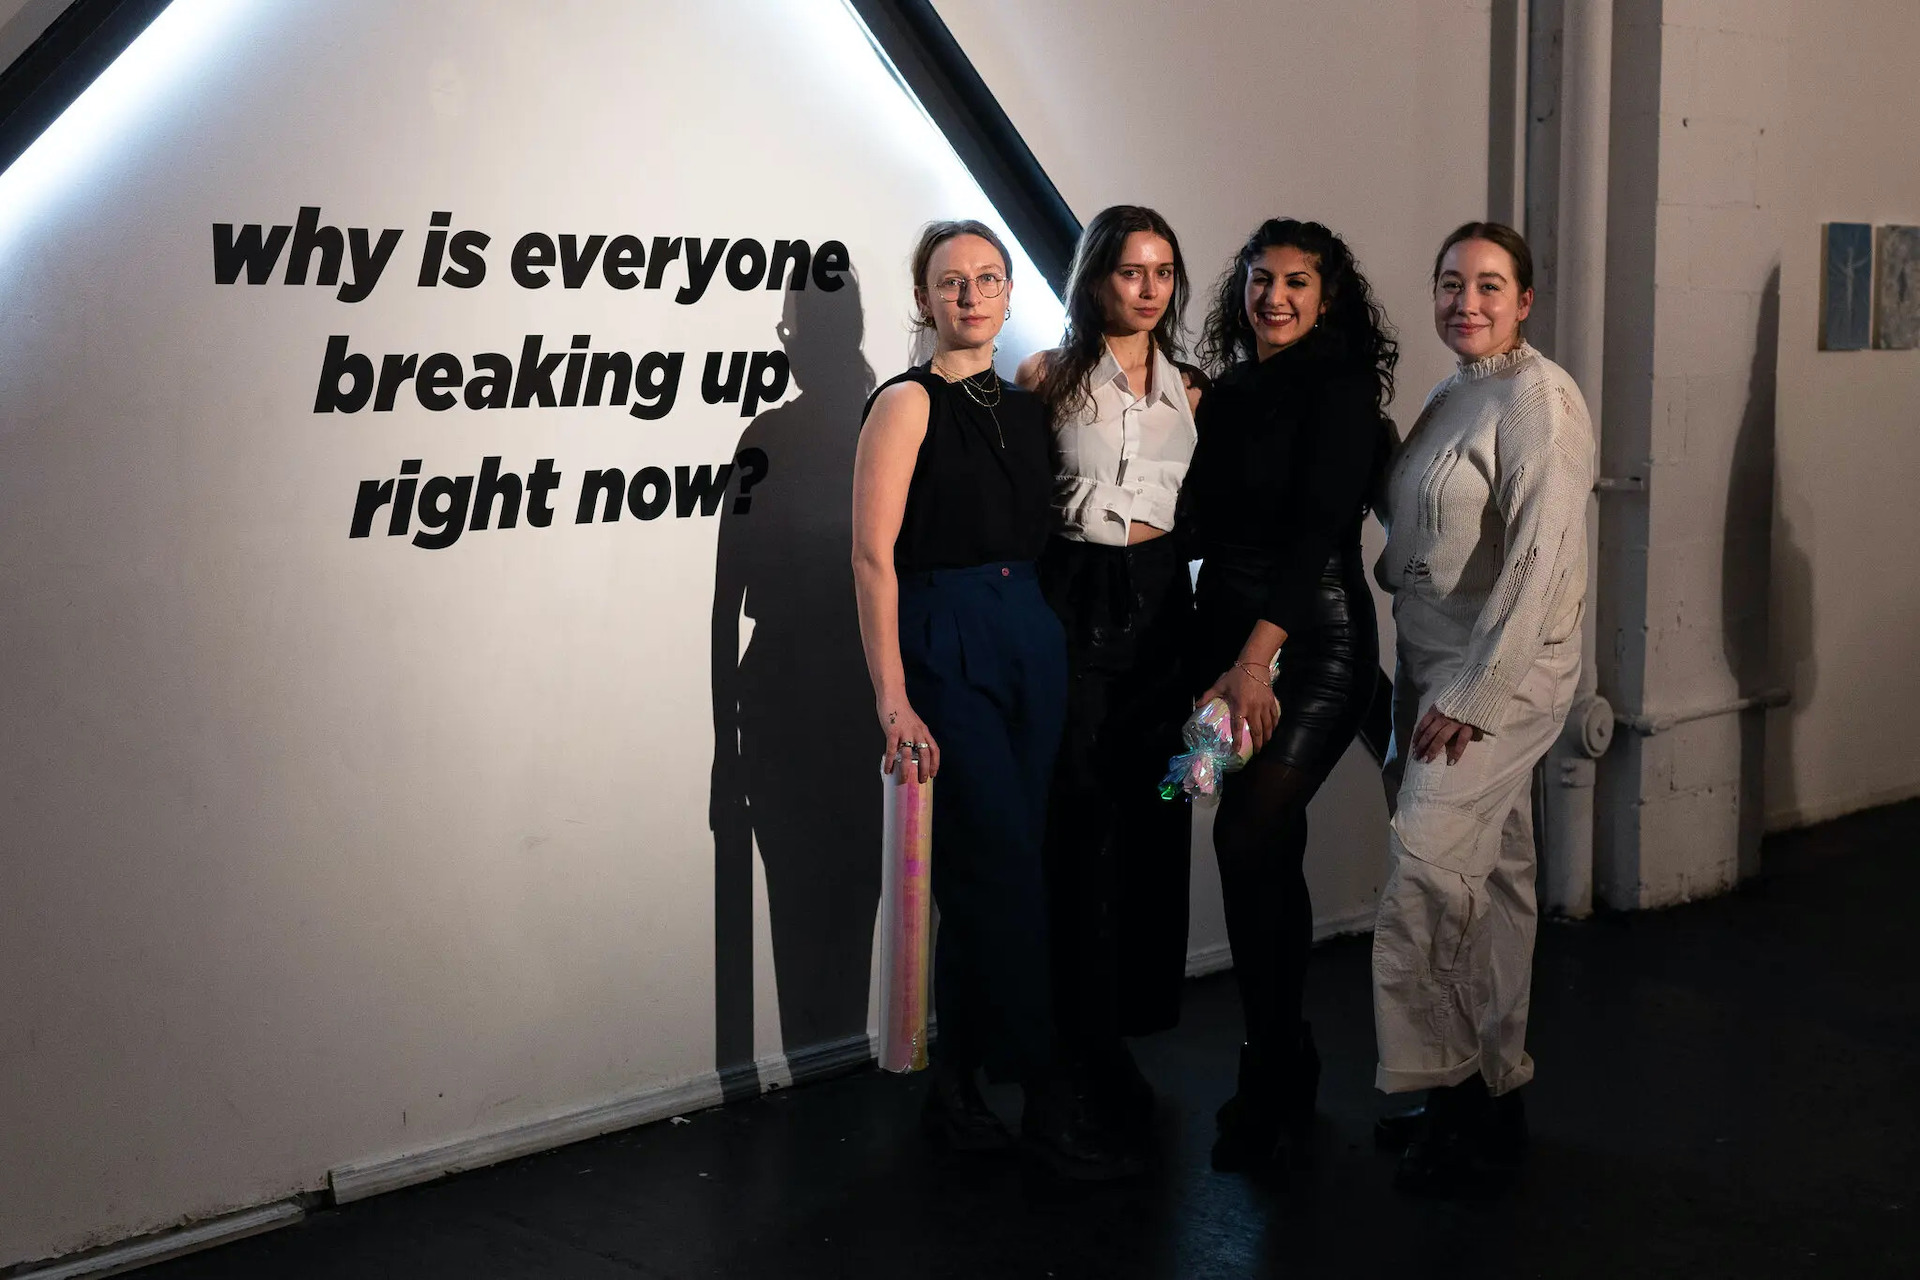 From left, Molly Ritmiller, Maya Pollack, Silvia Beatriz Abisaab and Blair Simmons, curators of the exhibit. Photo by Ali Cherkis for The New York Times